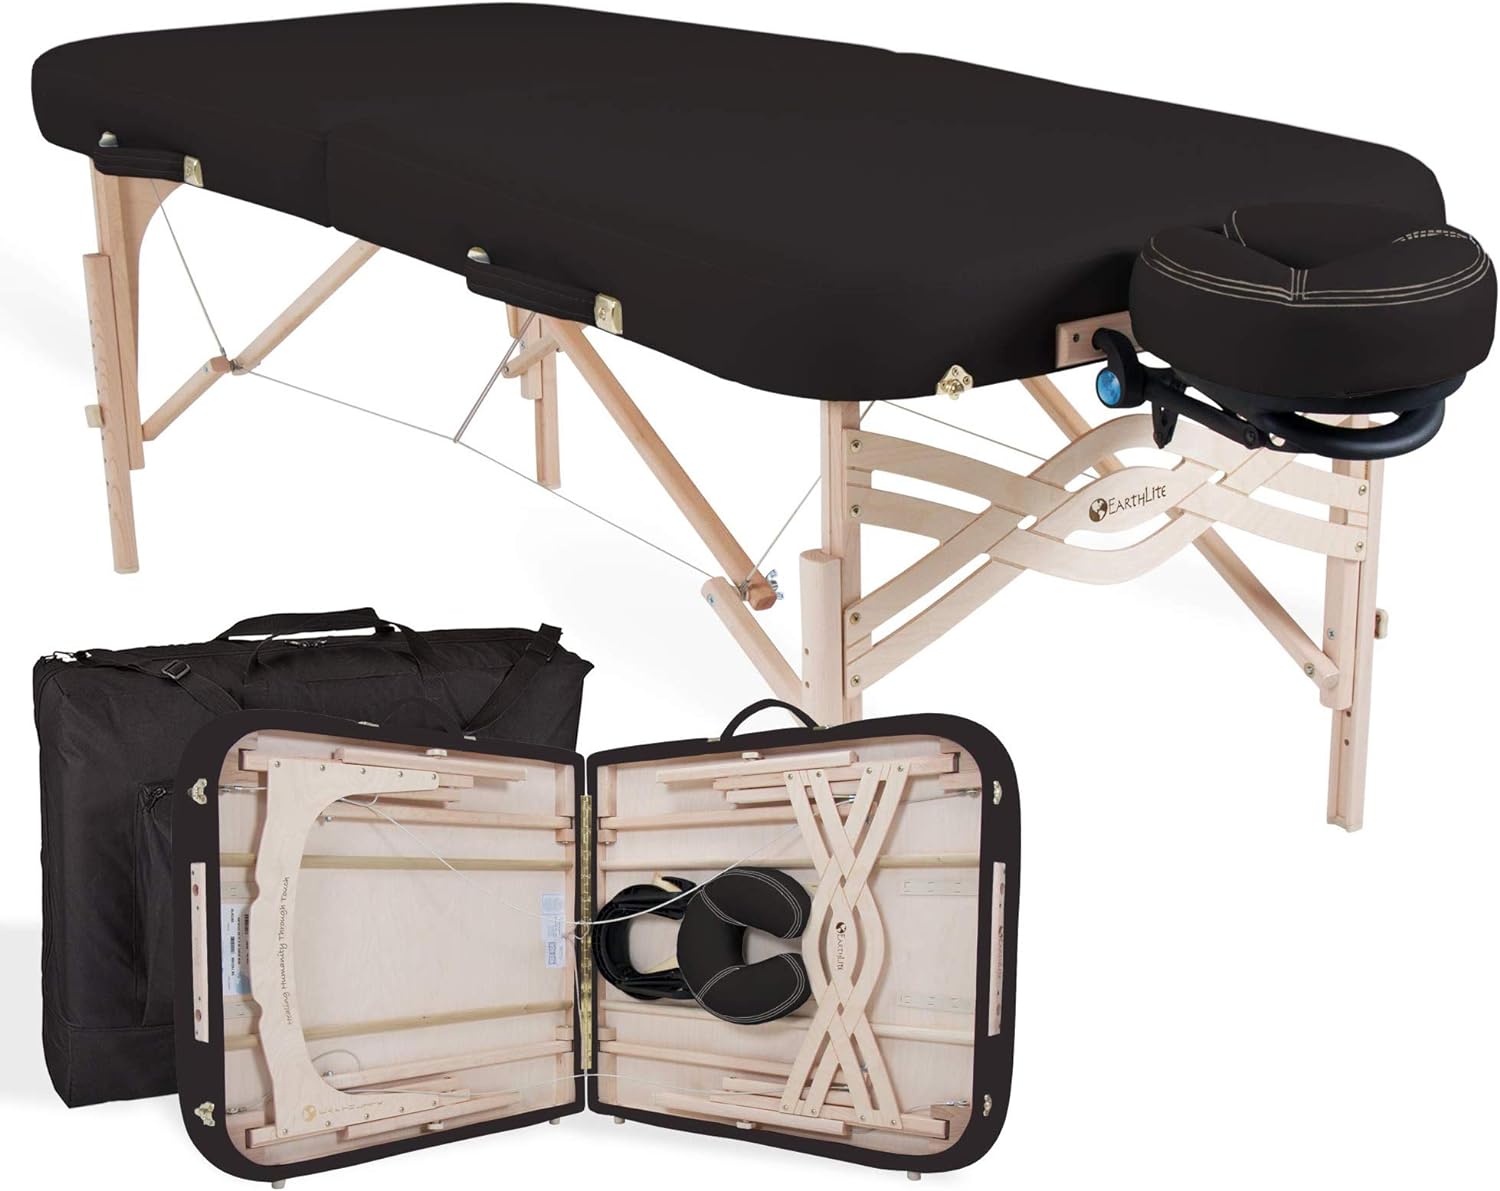 EARTHLITE Premium Portable Massage Table Package SPIRIT - Spa-Level Comfort, Deluxe Cushioning incl. Flex-Rest Face Cradle & Strata Face Pillow, Carry Case (30/32” x 73”) - Made in USA